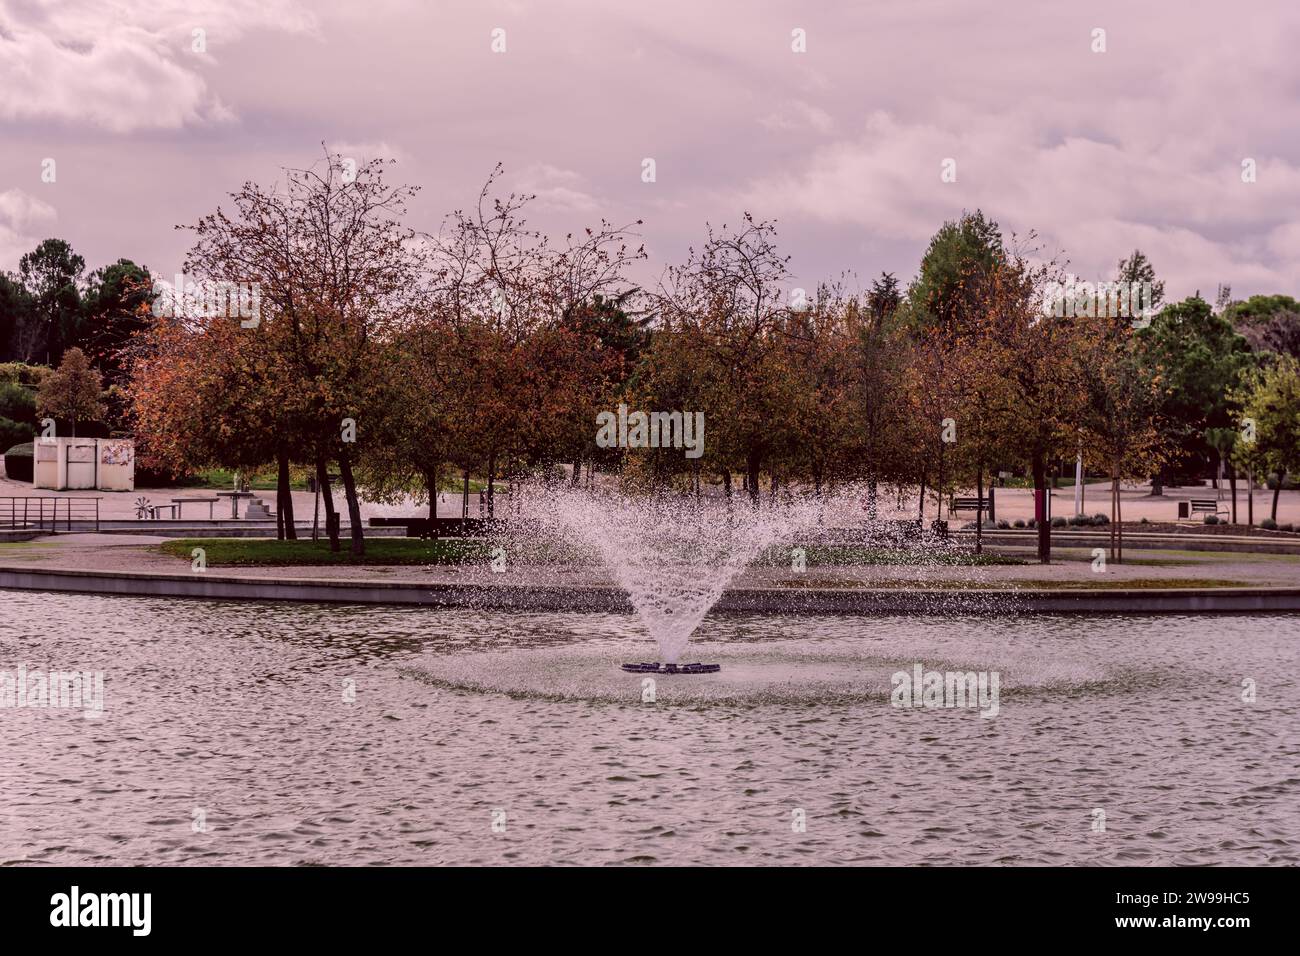 A fountain in the middle of an artificial lagoon releasing a circular stream of water in the middle of an urban park Stock Photo